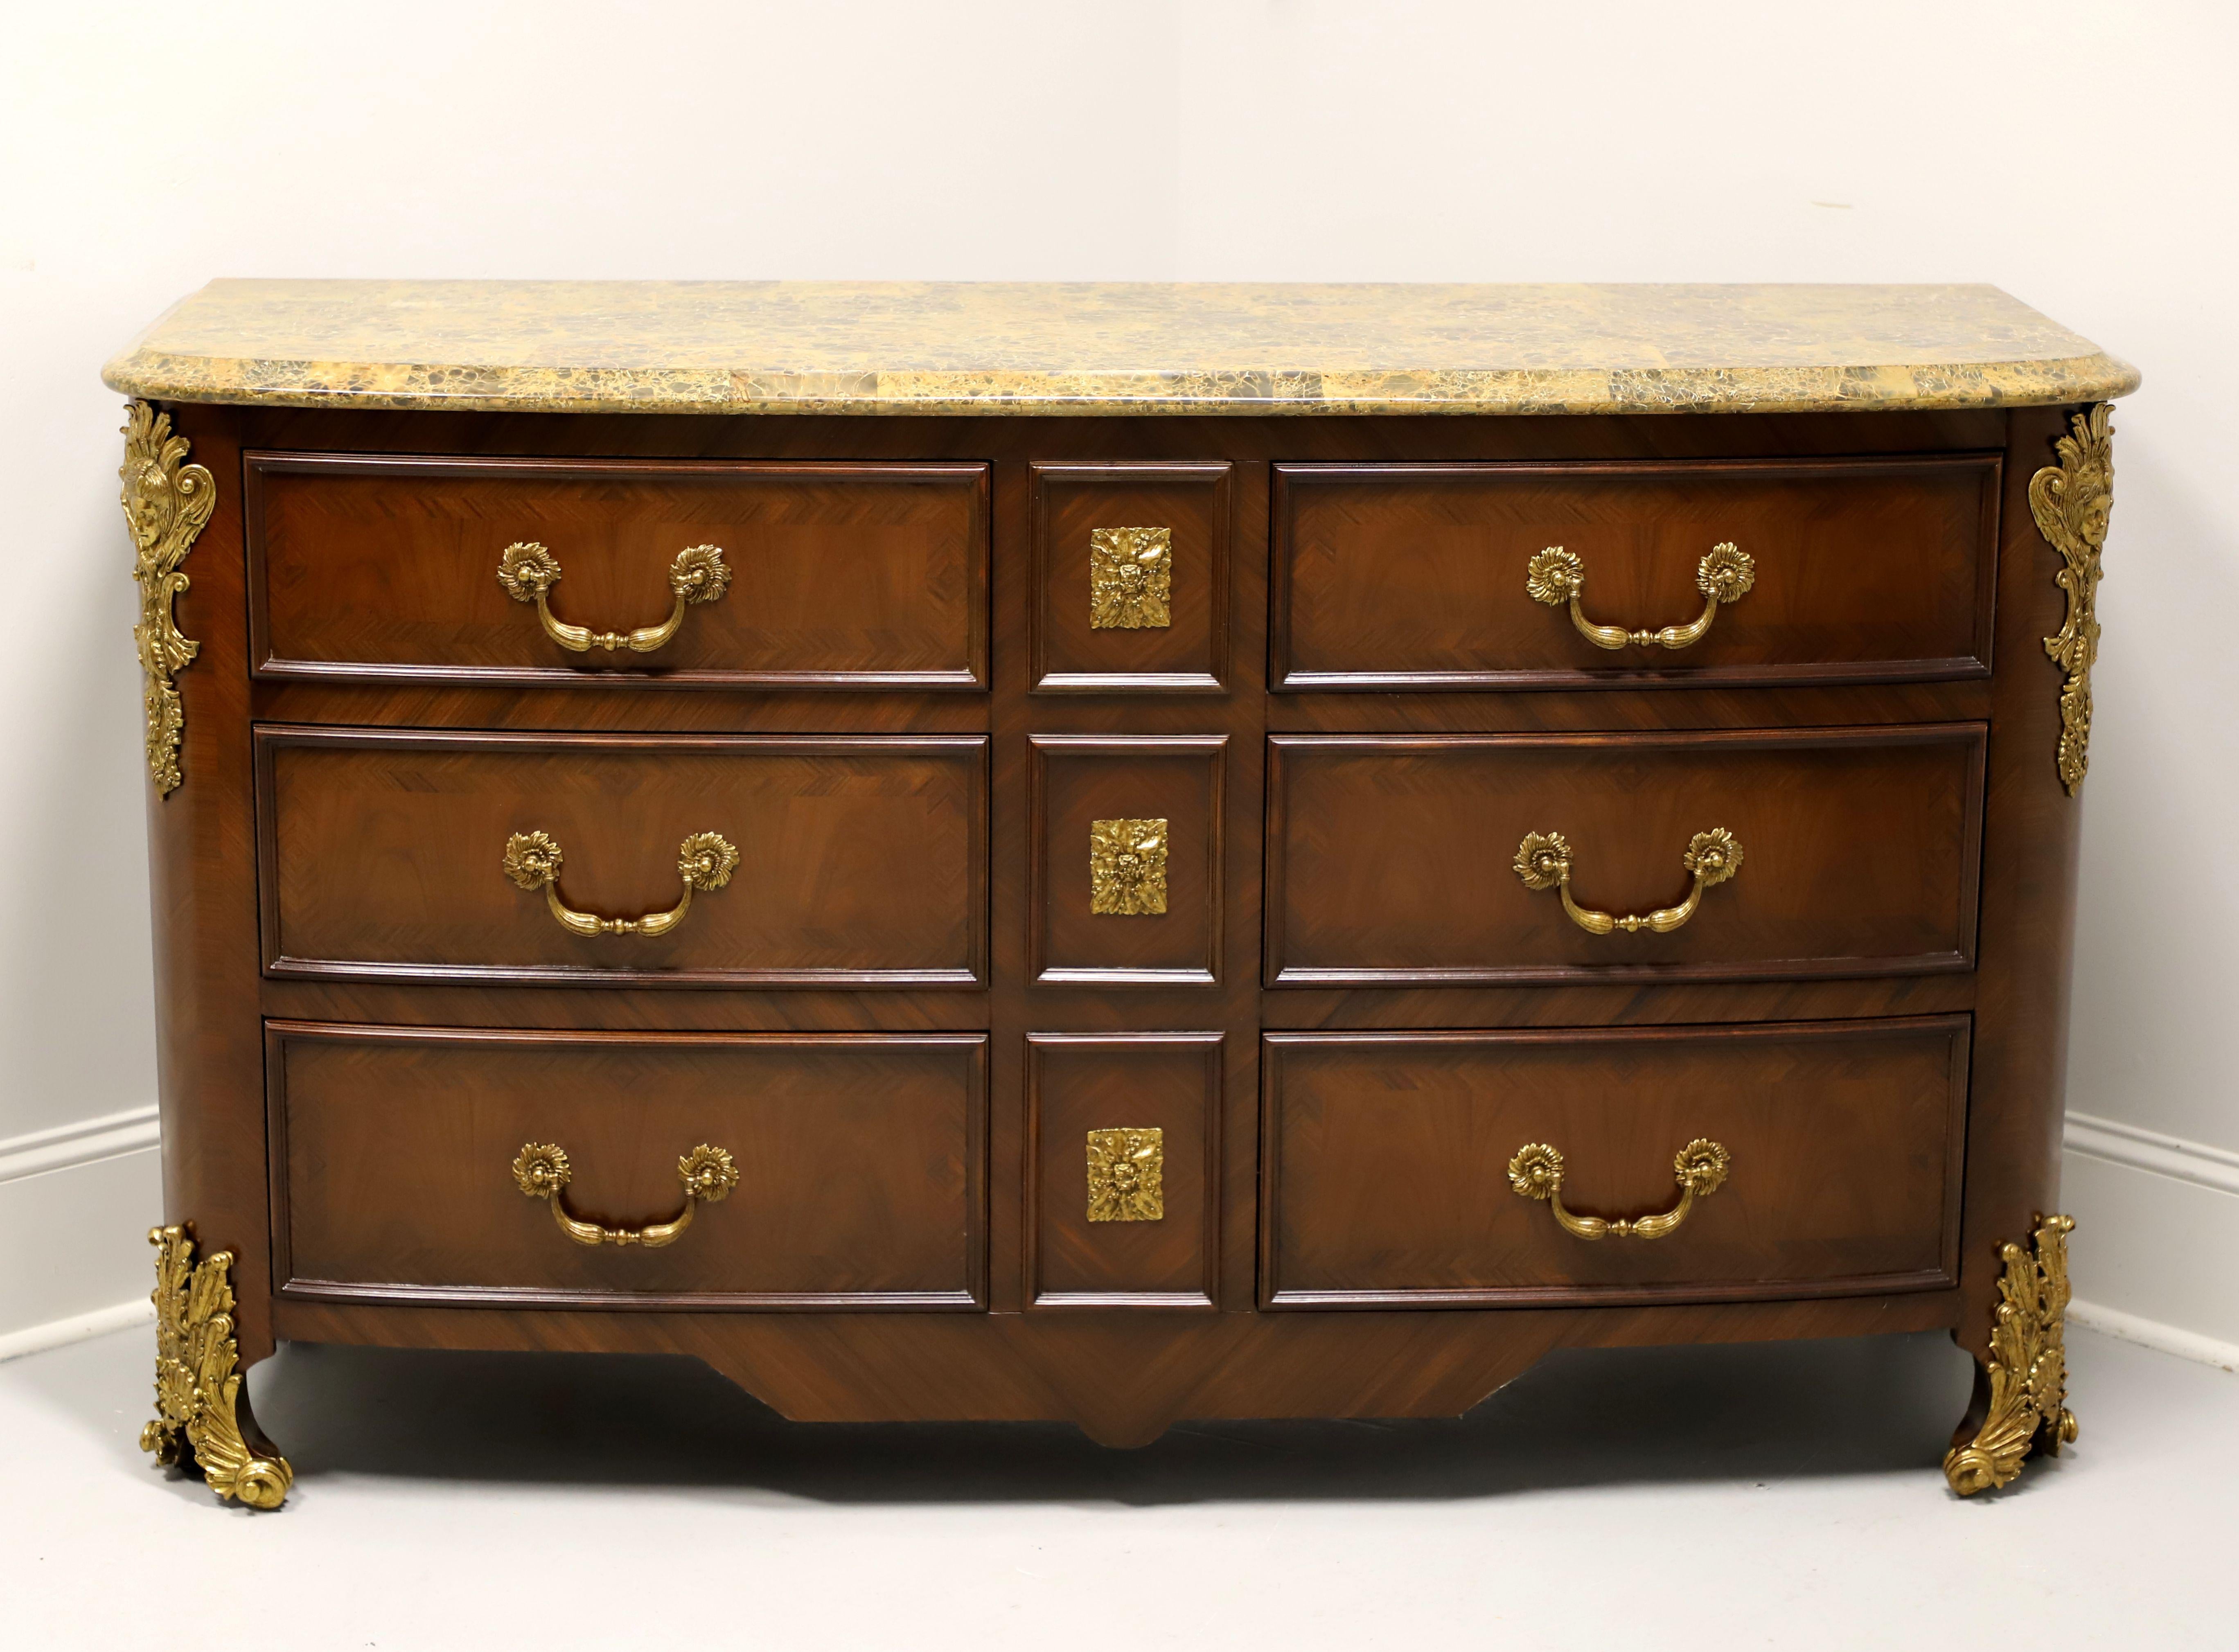 Philippine MAITLAND SMITH Inlaid Walnut French Regency Occasional Chest with Ormolu Mounts For Sale